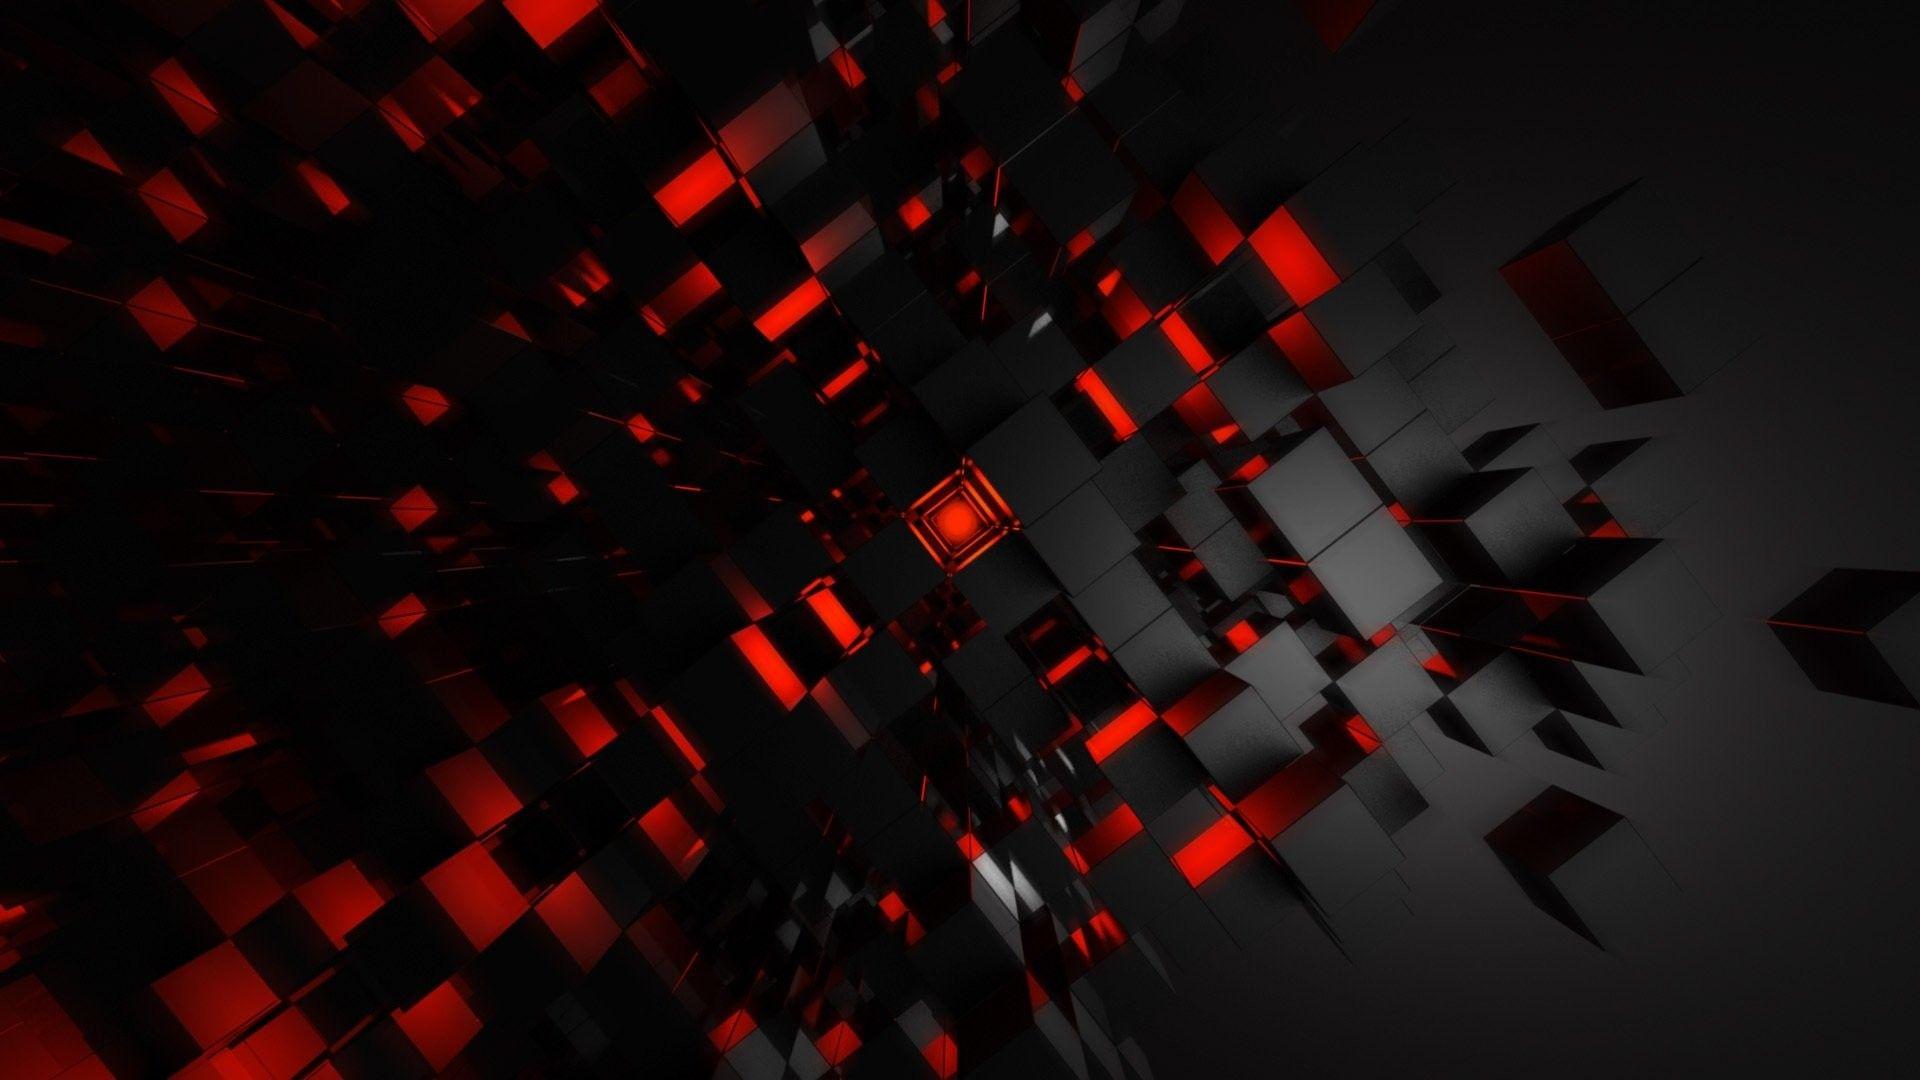 HD wallpaper abstract 1920x1080 black red cube and 4K hd  Wallpaper  Flare